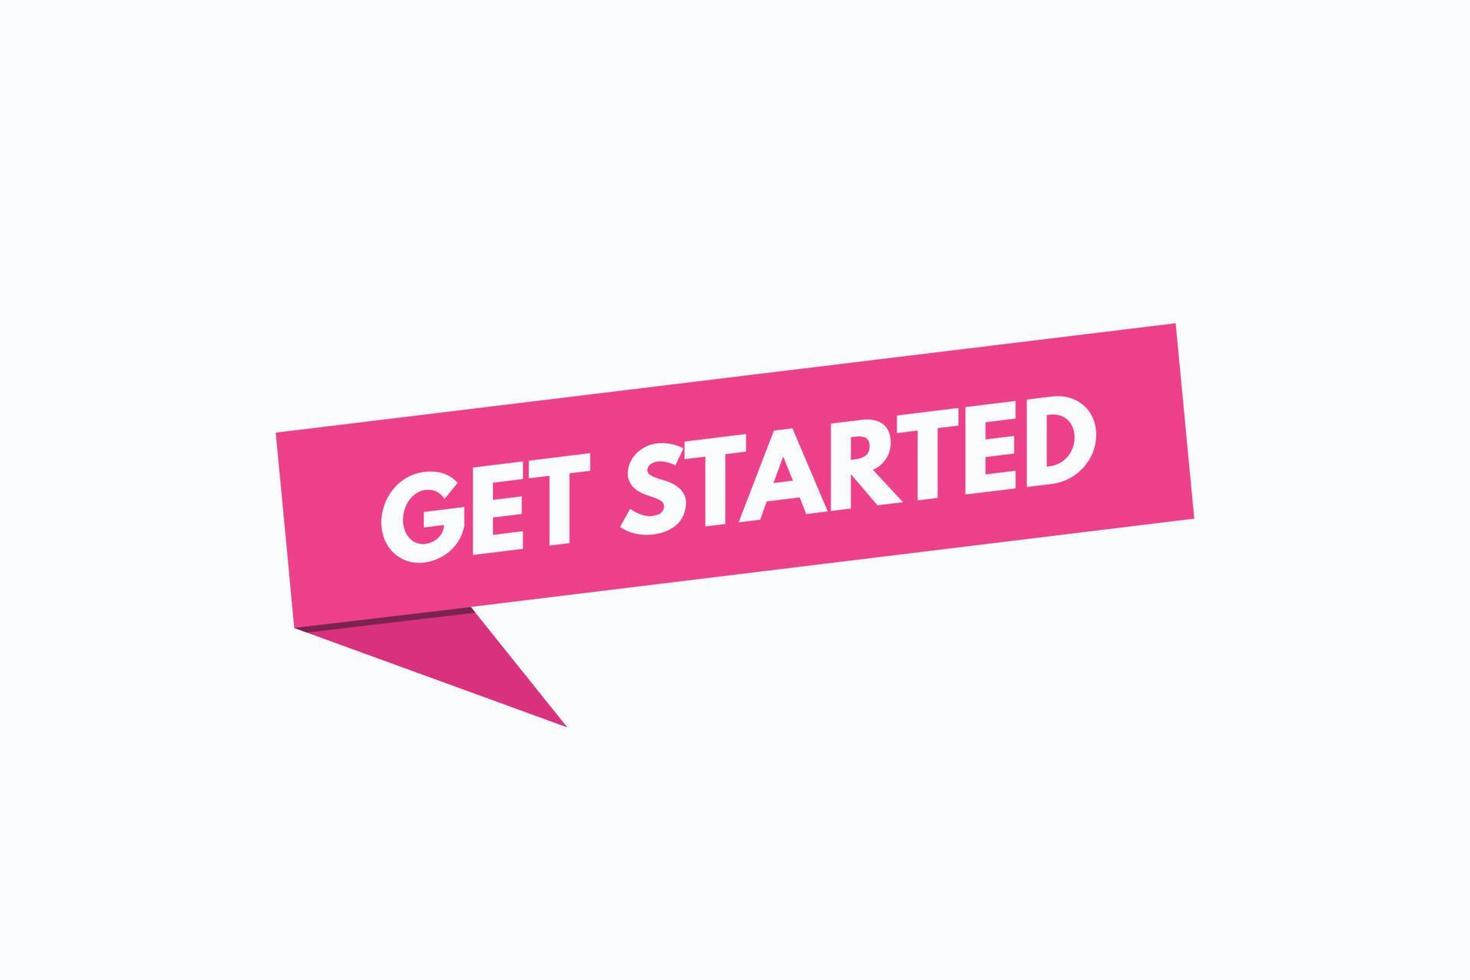 get started button vectors. sign label speech bubble get started vector